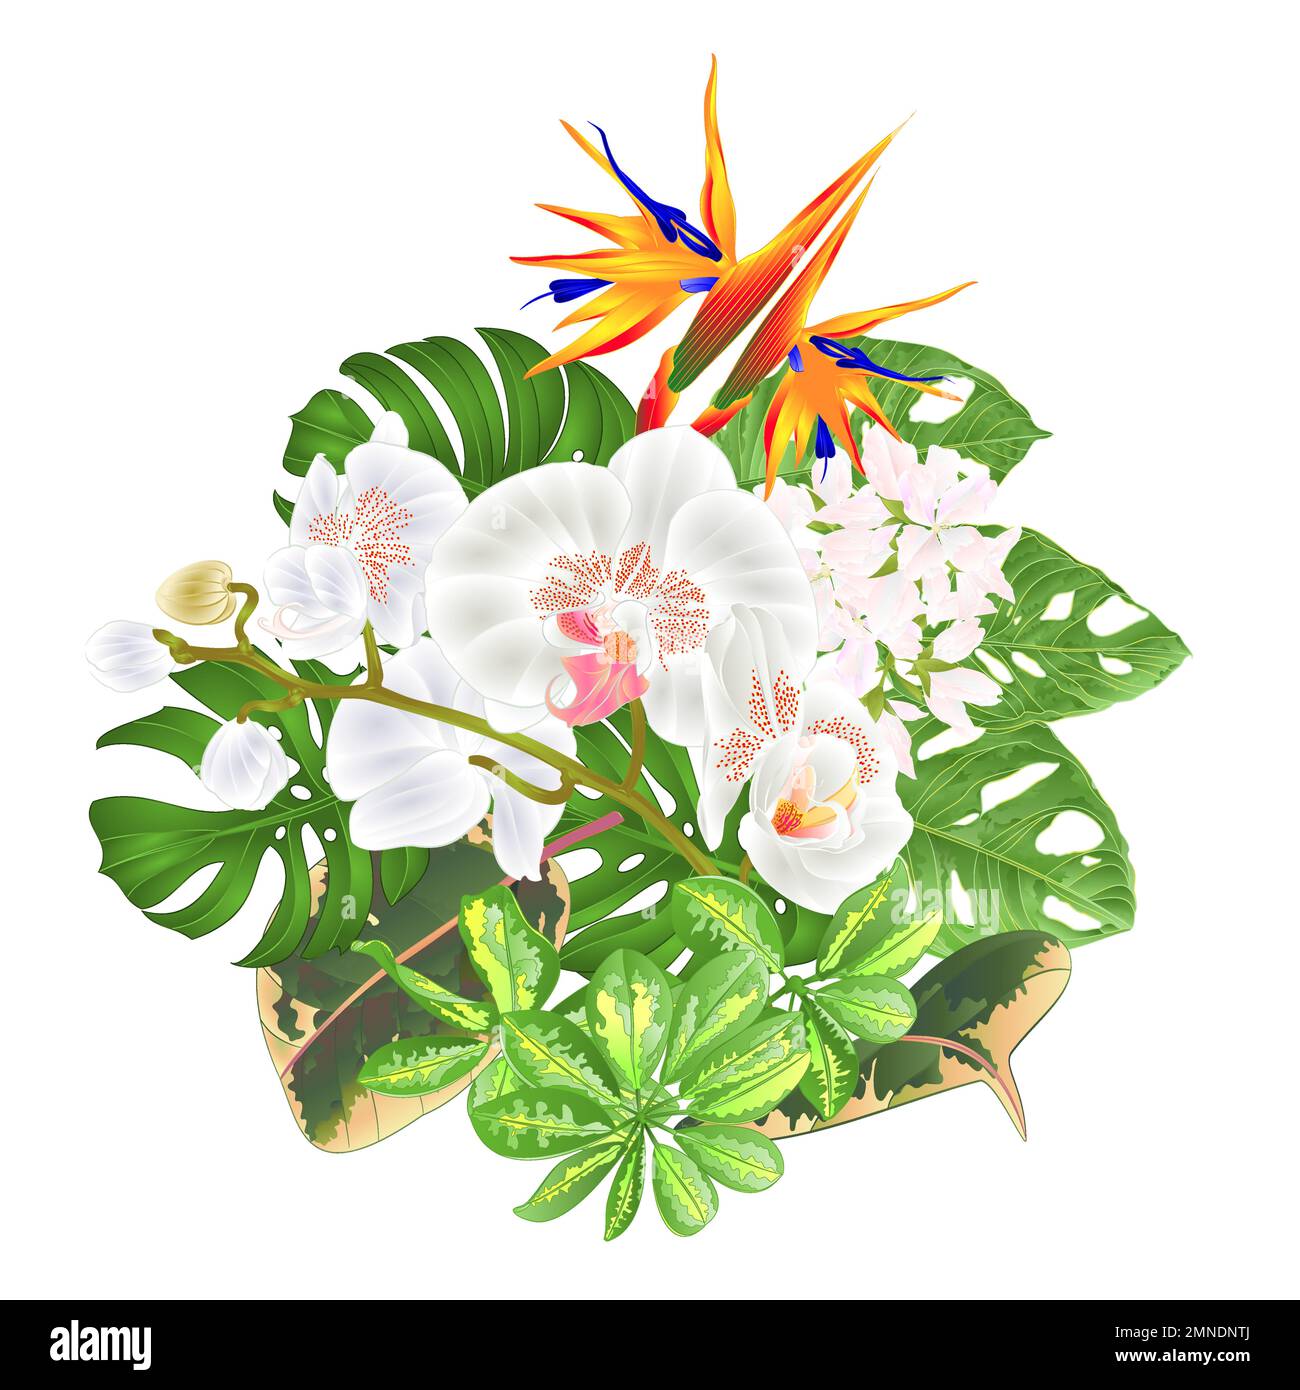 Bouquet with tropical flowers  floral arrangement with  Strelitzia and white  orchid Phalaenopsis philodendron and Schefflera and Monstera  vintage ve Stock Vector